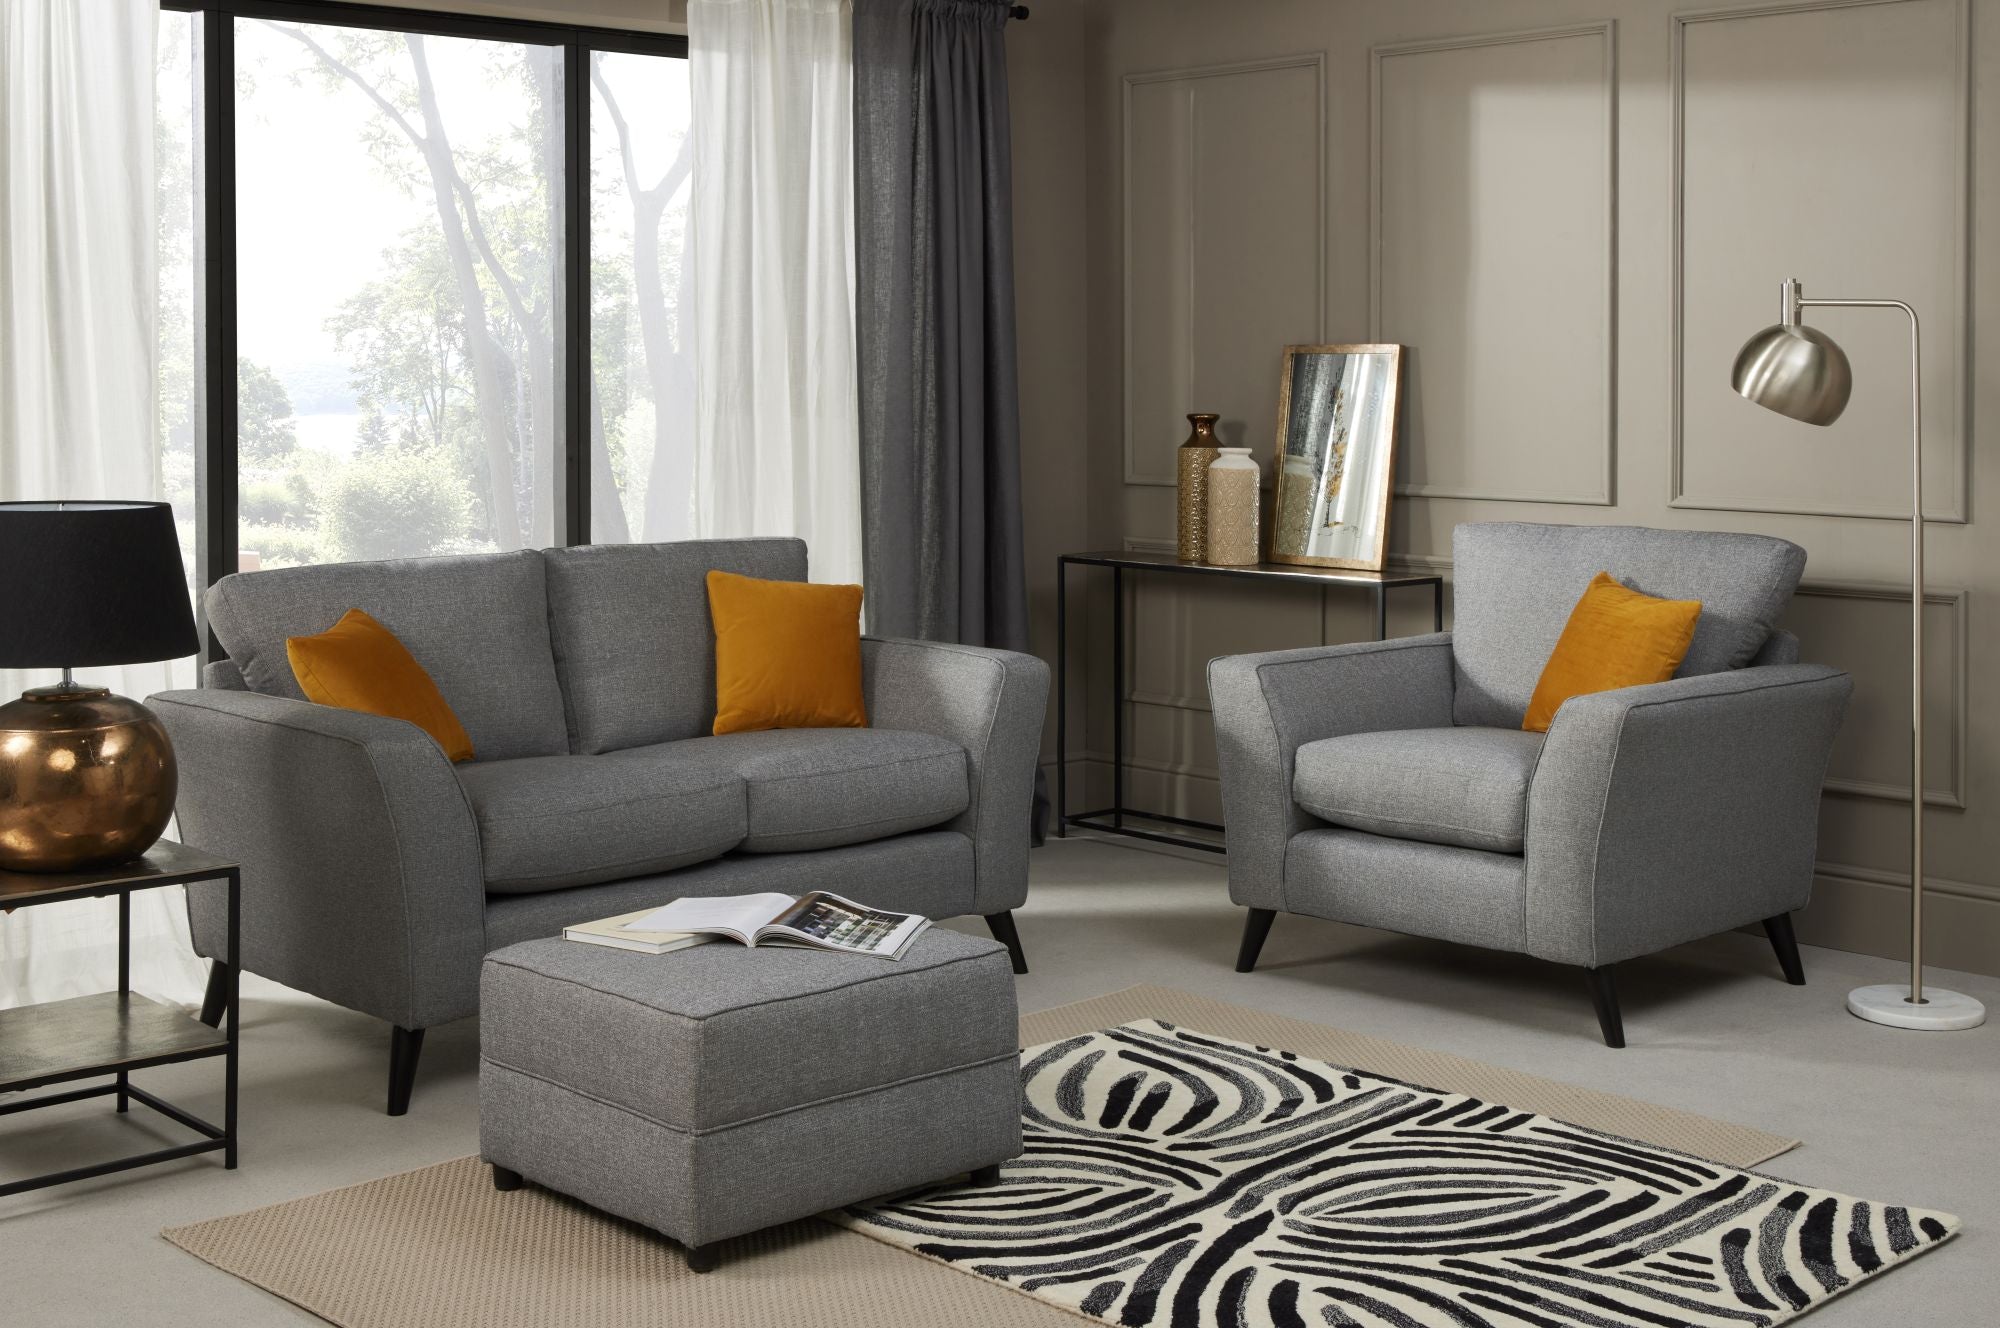 Libby 2 seater sofa, armchair and footstool in Charcoal colour shown in a room setting